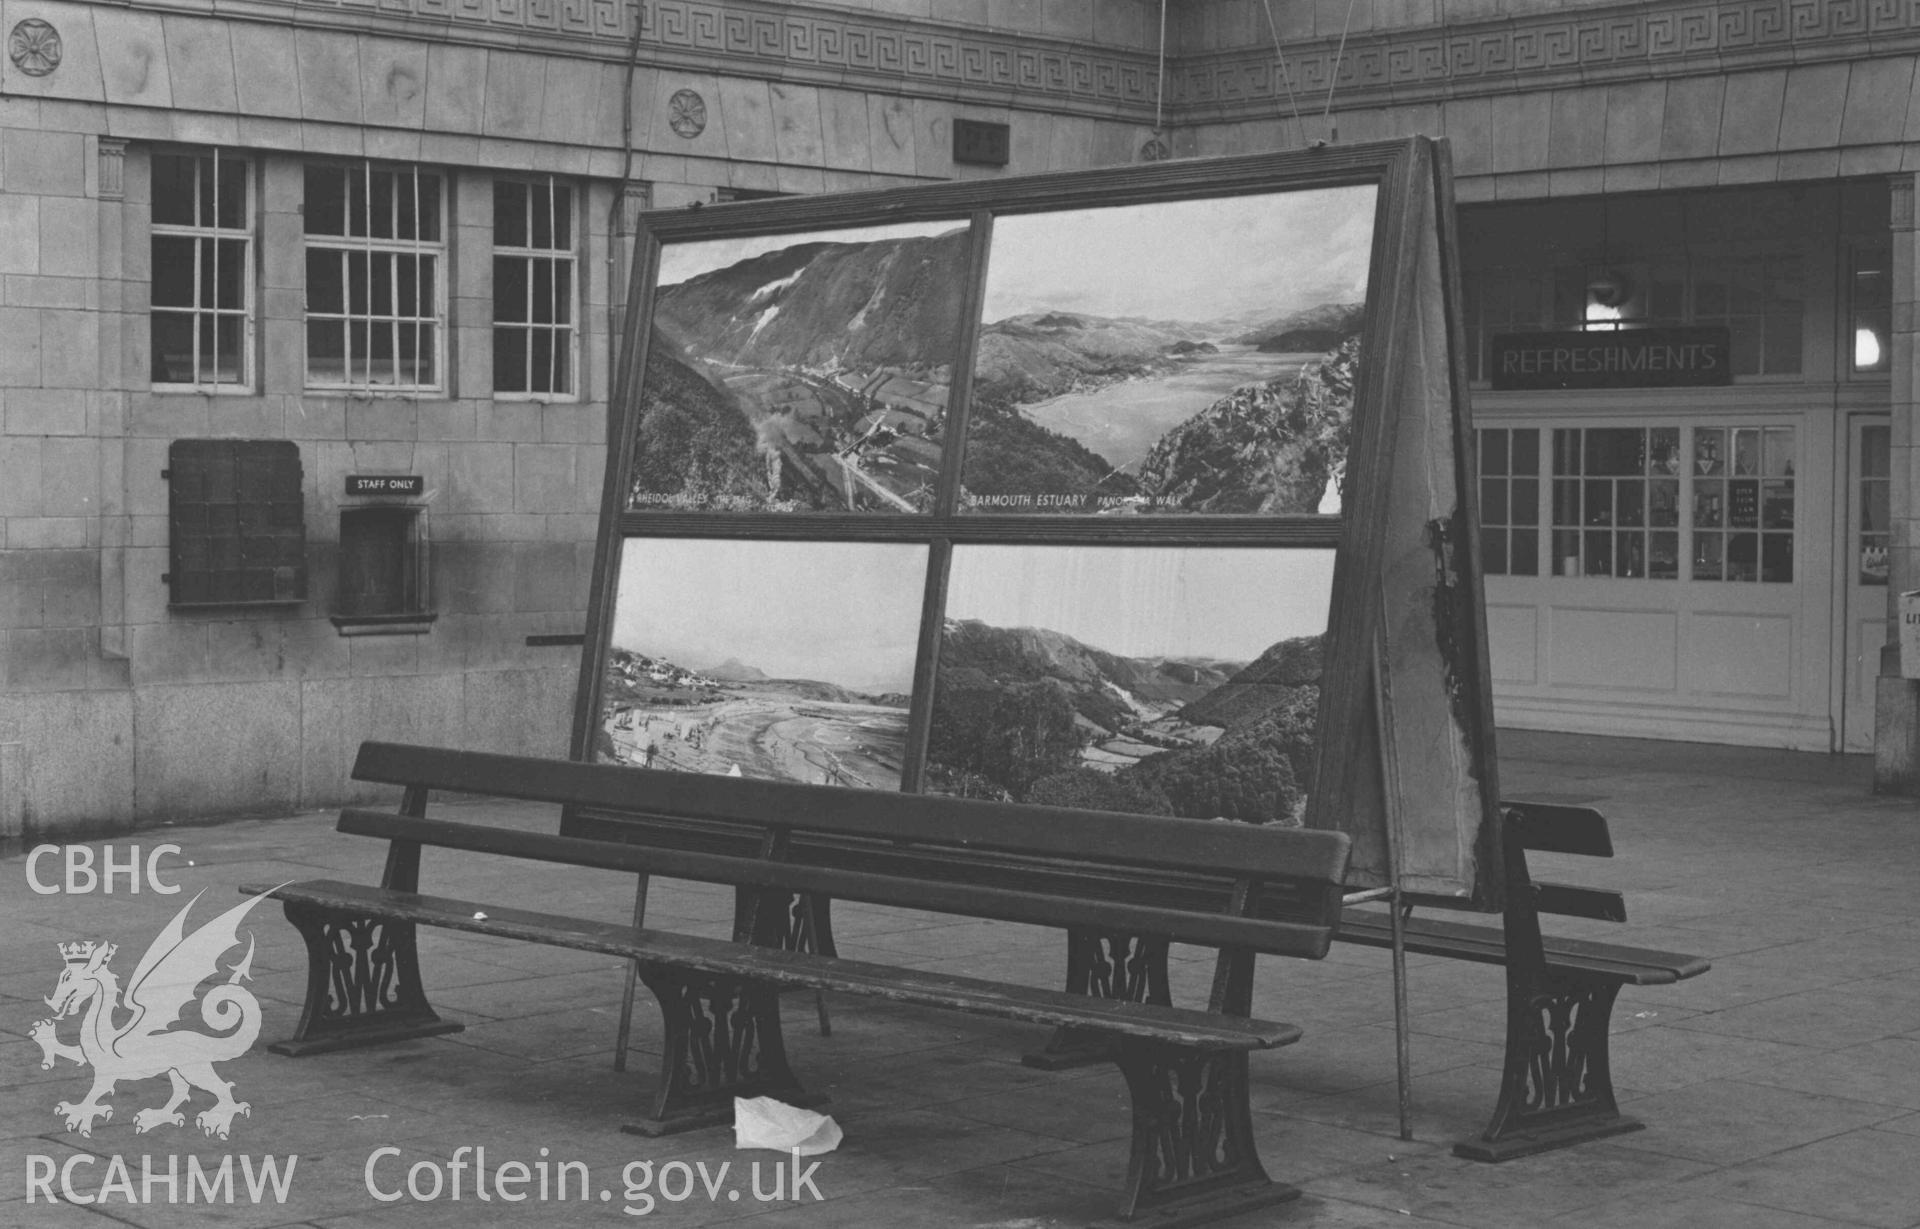 Digital copy of a black and white negative showing the exhibition case at Abersytwyth Railway Station. Photographed by Arthur Chater on 3 January 1969. Looking south east from Grid Reference SN 5852 8157.